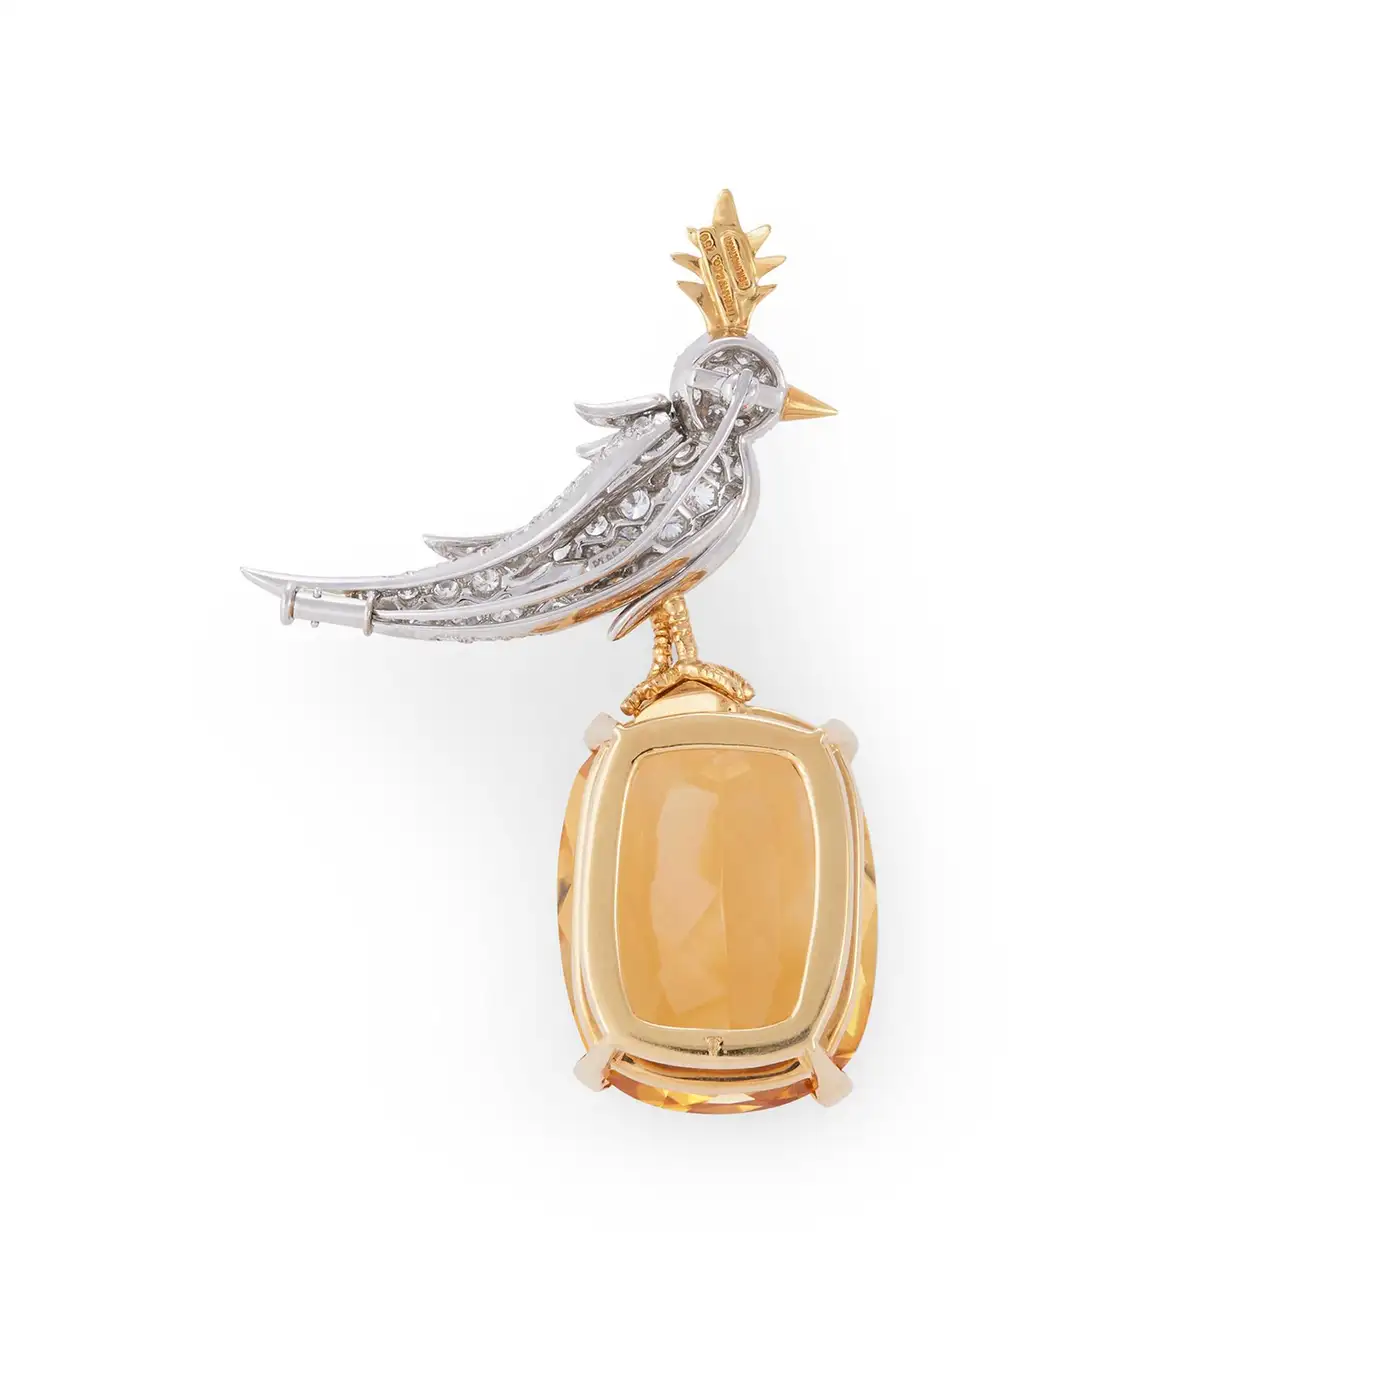 Bird-on-a-Rock-Citrine-and-Diamond-Brooch-Jean-Schlumberger-for-Tiffany-Co-5-1.webp